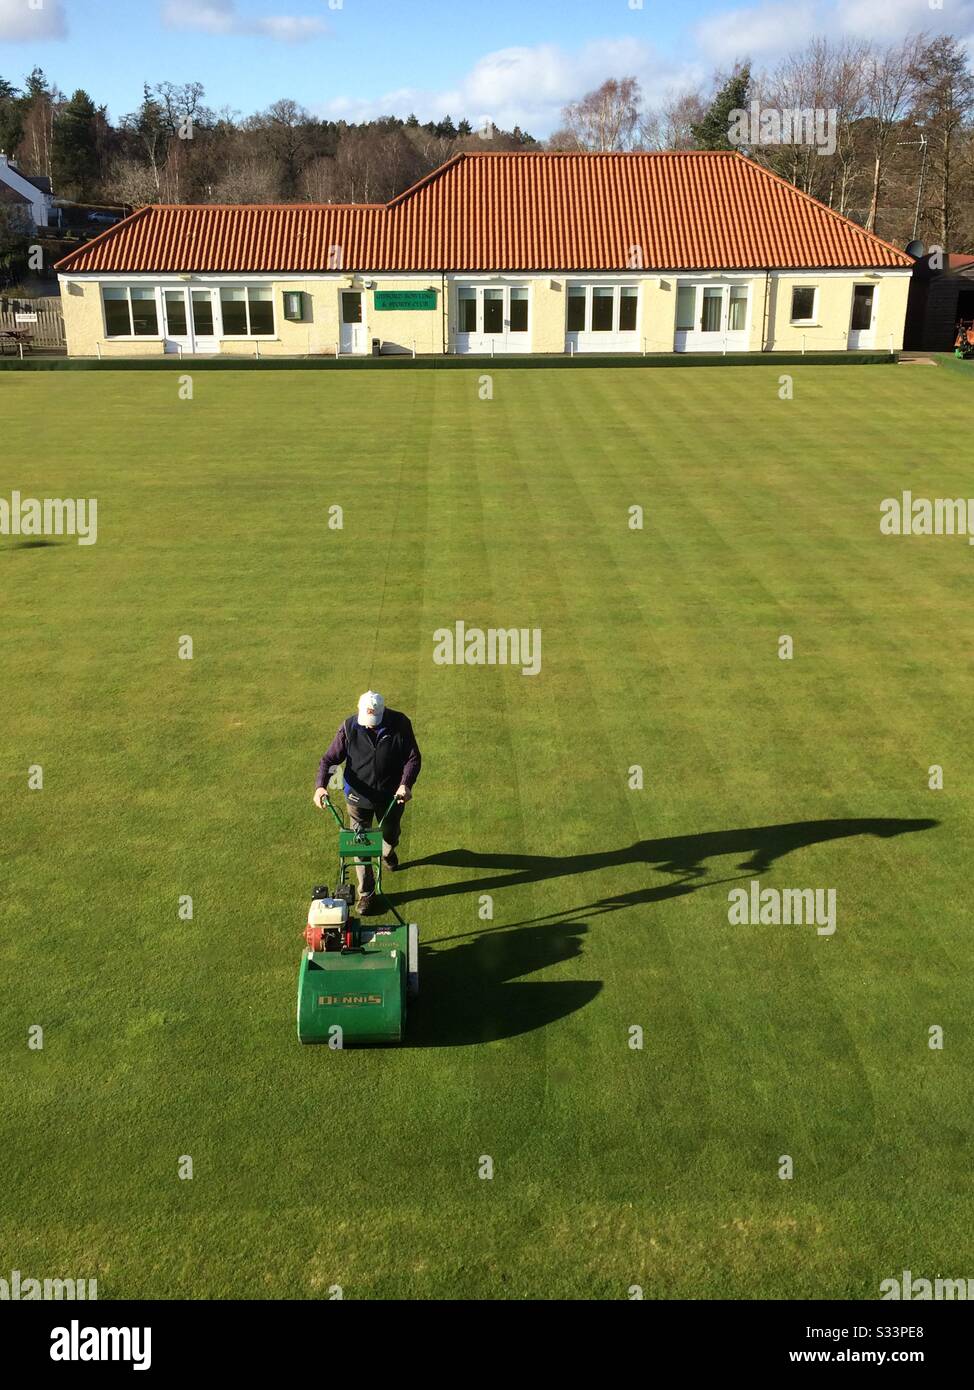 The first cut of spring at the Bowling Club in Gifford, East Lothian, UK. With dusk approaching, after a dry day, a volunteer official is out mowing with only his shadow for company. Stock Photo